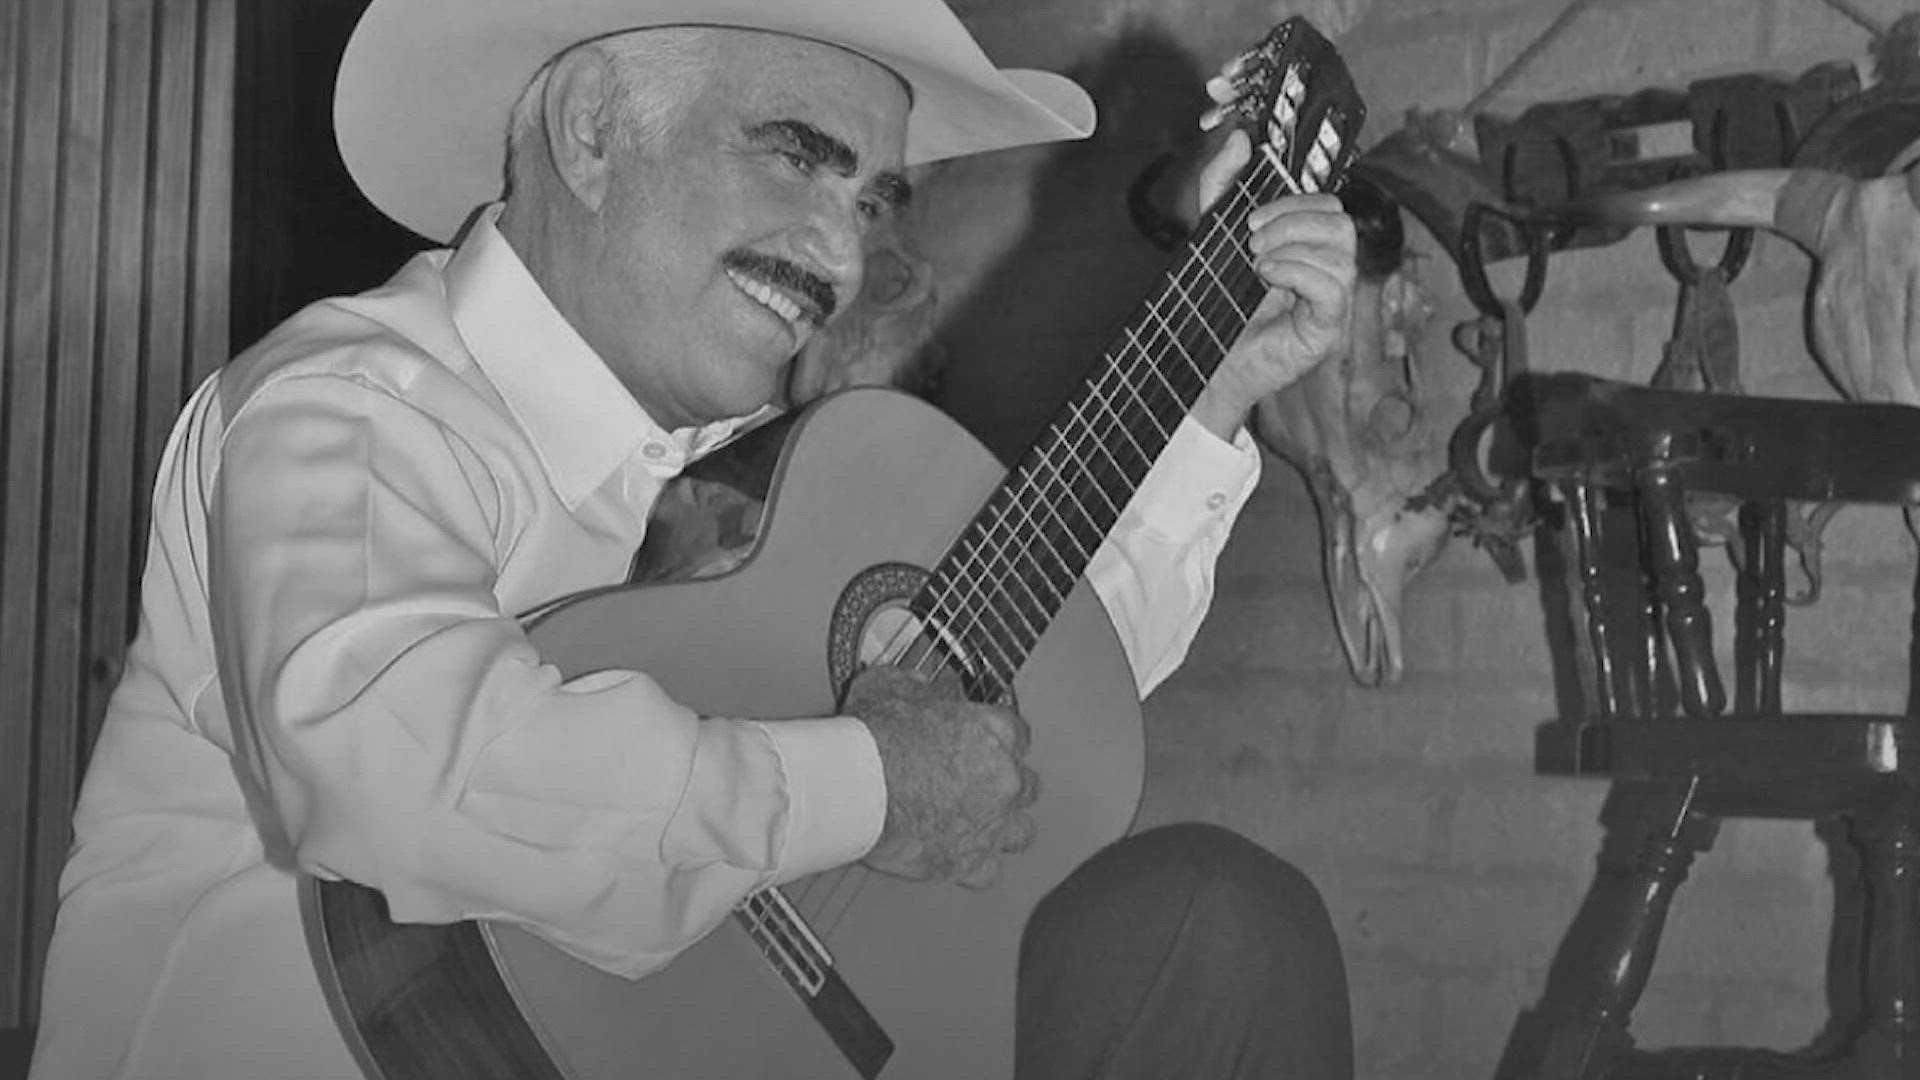 A staple in the Latin music world, the 'King of Rancheras' passed away Sunday, according to his social media account.